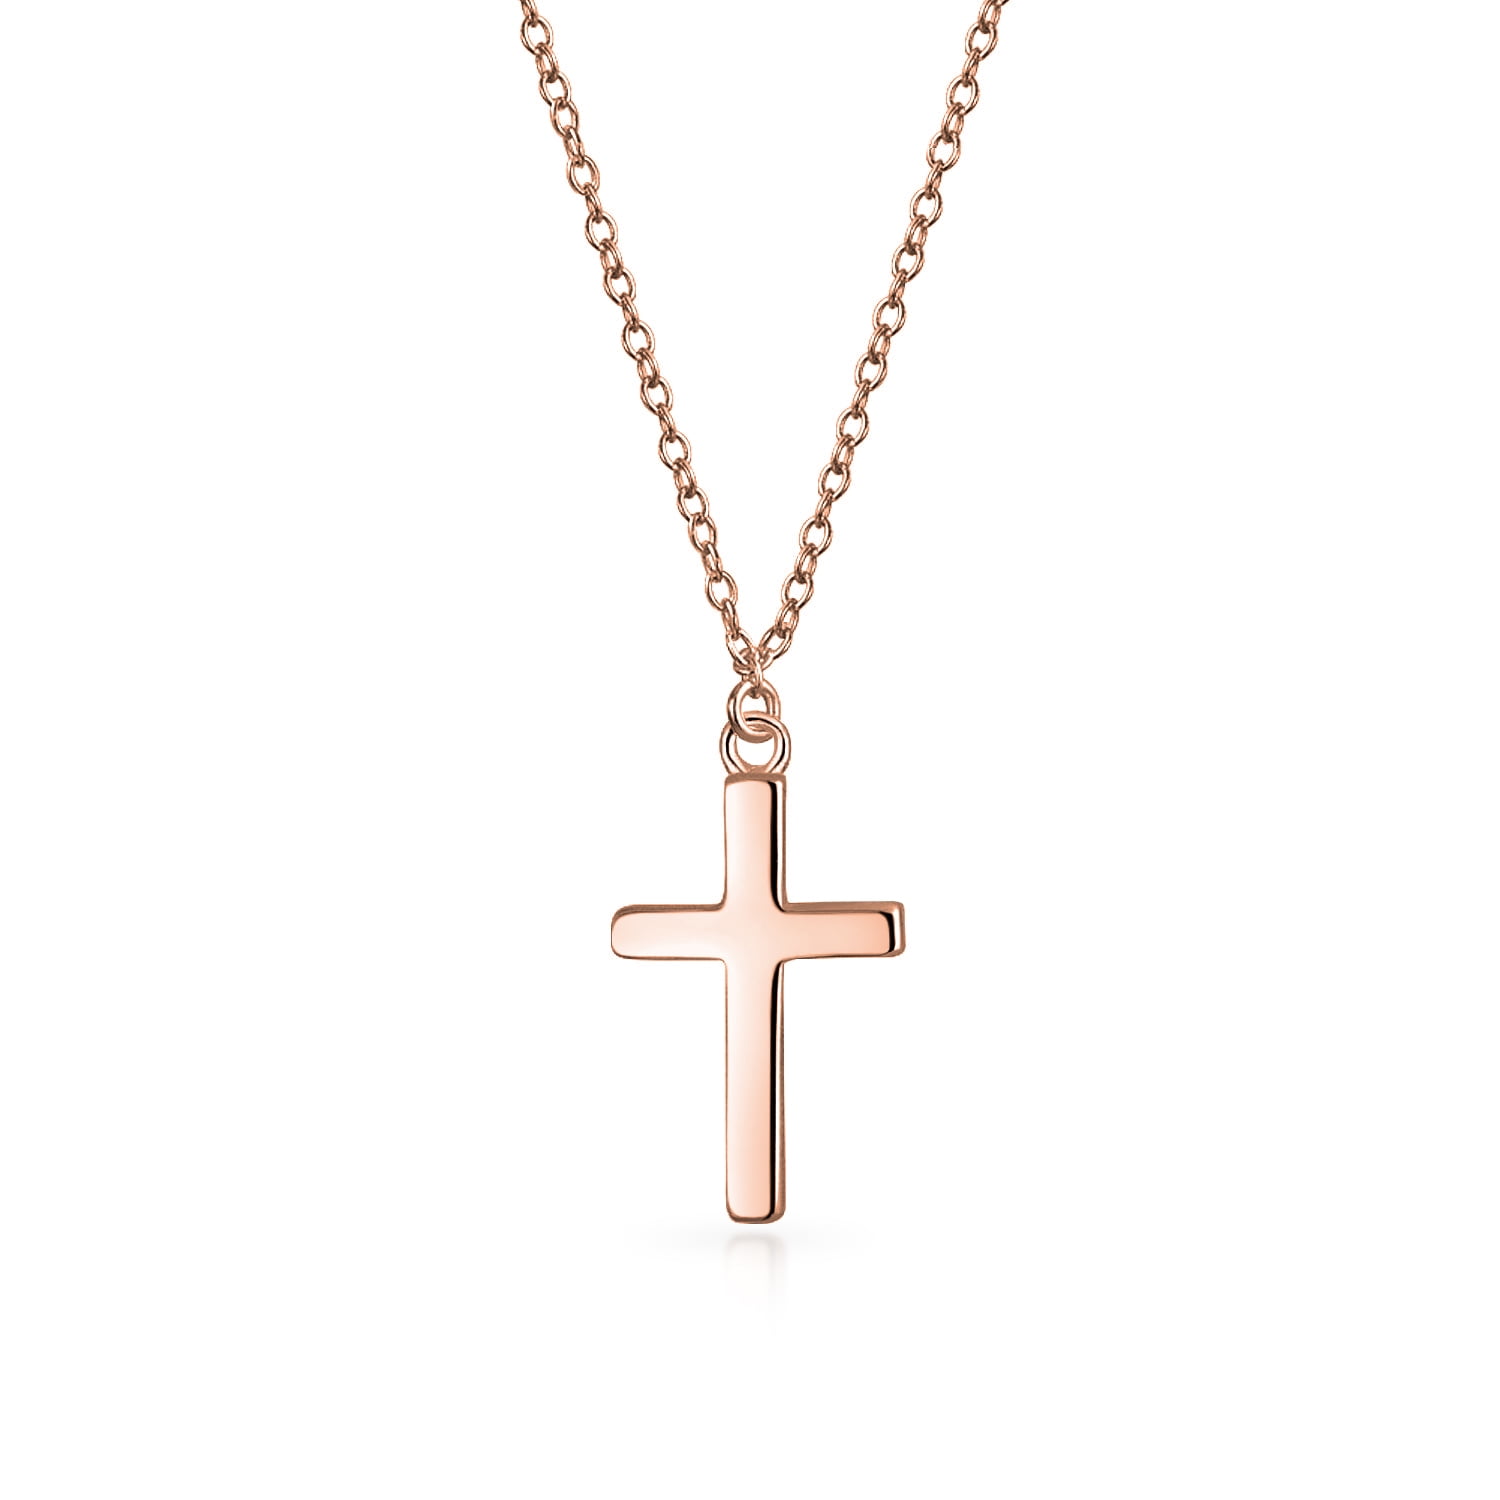 925 Sterling Silver Rhodium plated and Gold Tone Crucifix Pendant Necklace Jewelry Gifts for Women